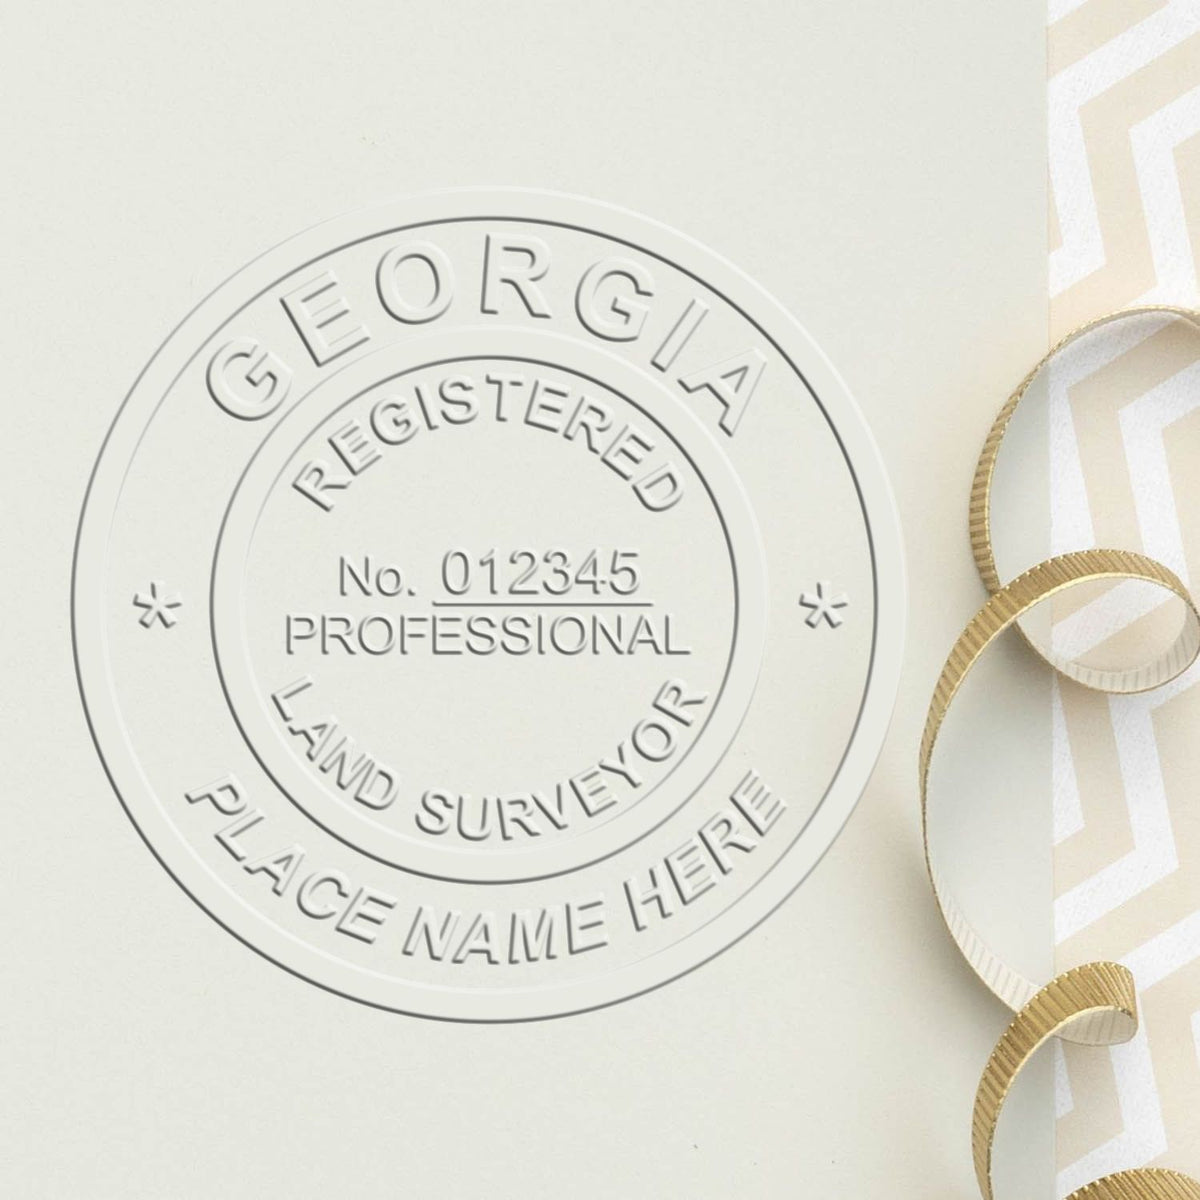 A stamped impression of the Long Reach Georgia Land Surveyor Seal in this stylish lifestyle photo, setting the tone for a unique and personalized product.